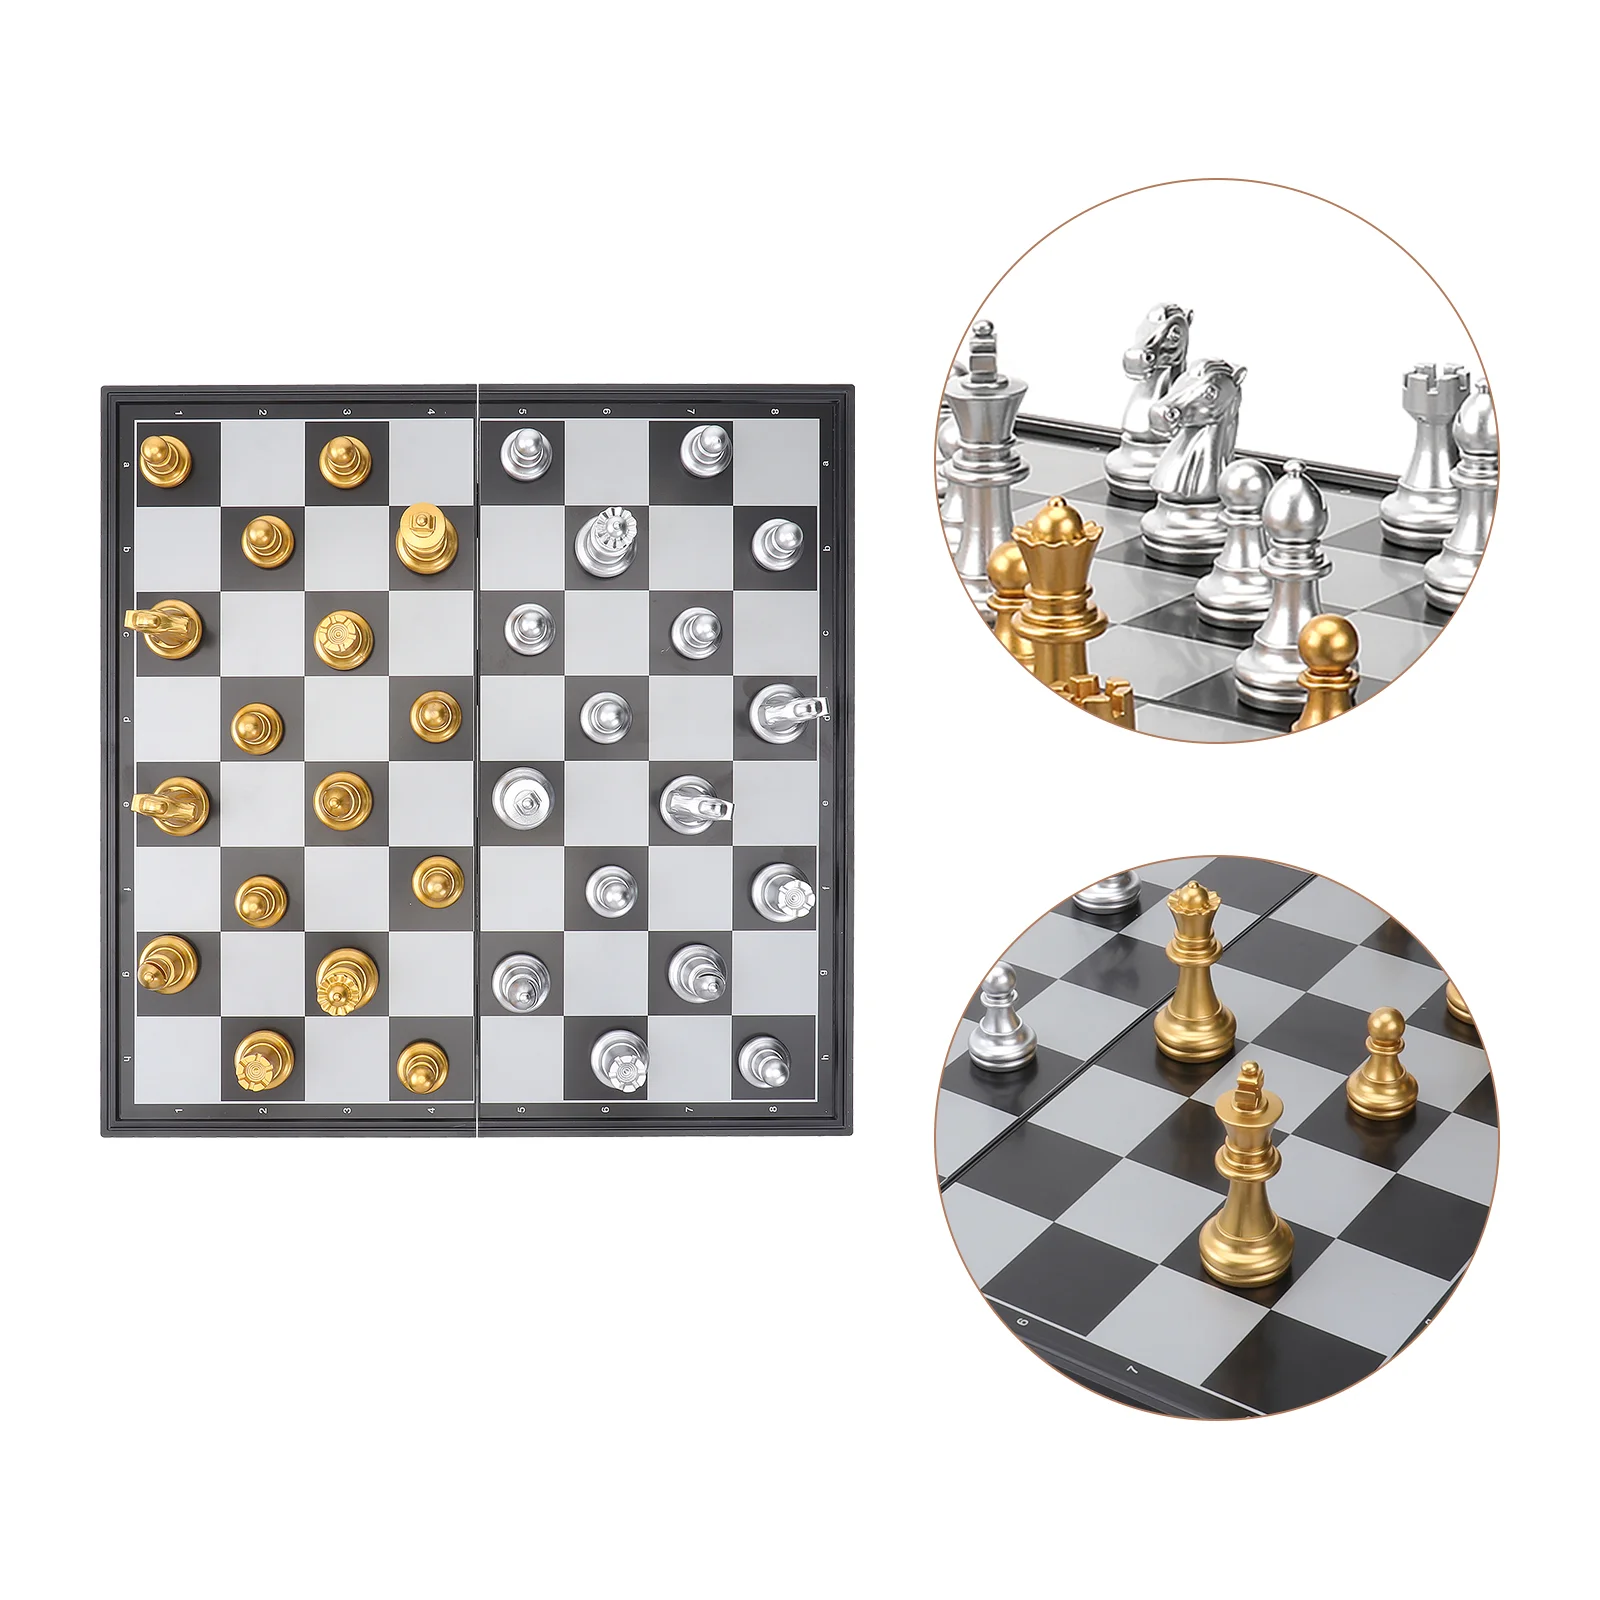 

1 Set Magnetic Travel Chess Set Folding Chess Board Game International Standard Chess Board Educational for Kids and